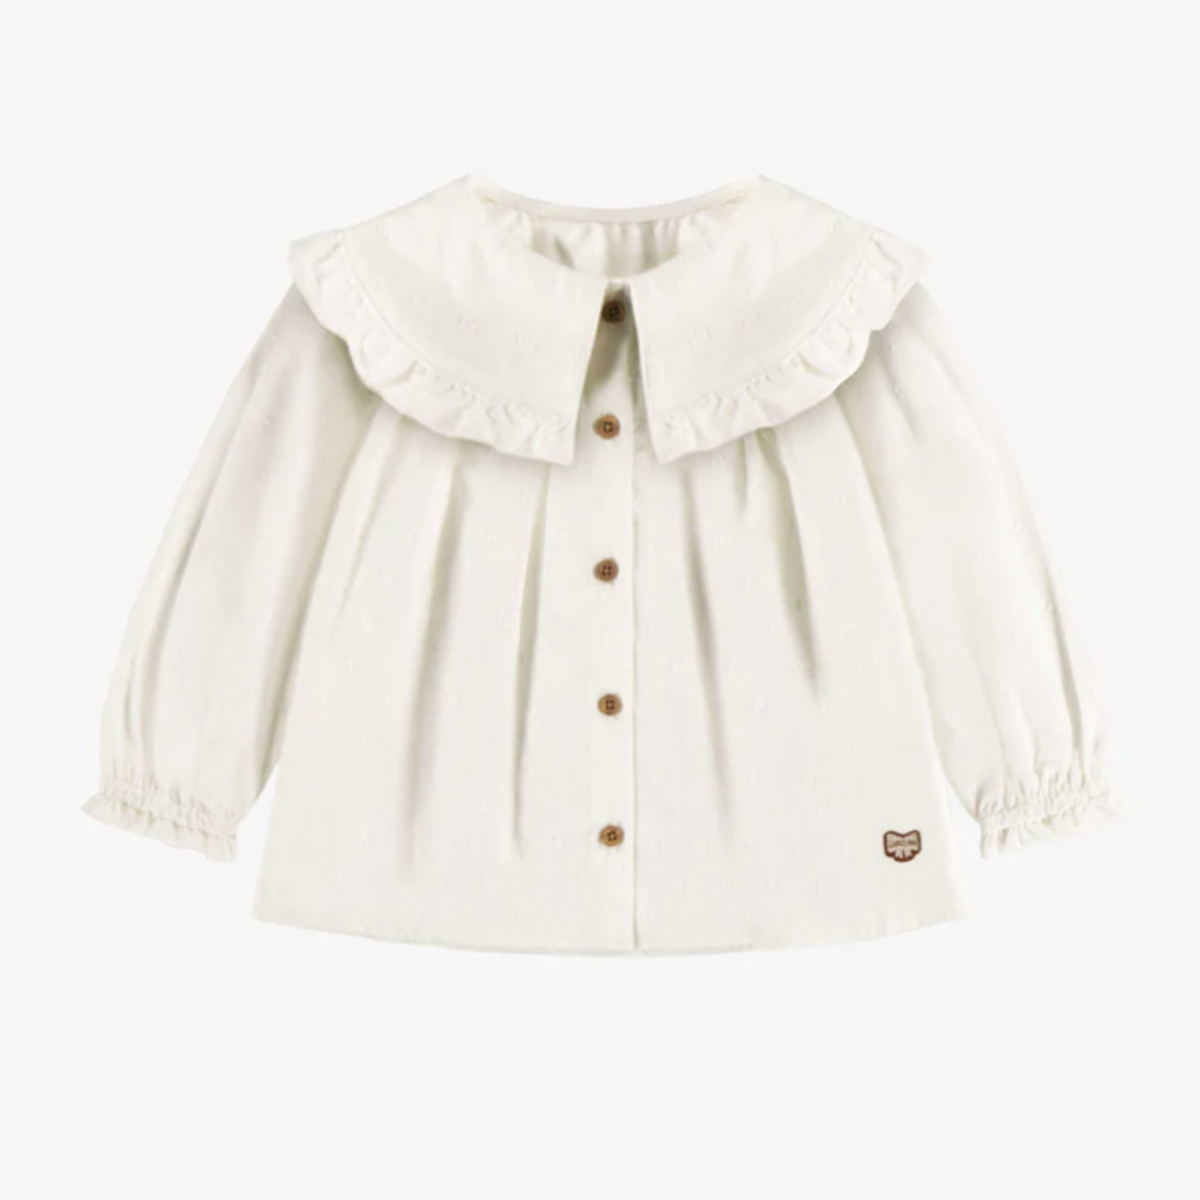 Loose Fit Cream Shirt with Wide Ruffle Collar in Cotton Poplin, Baby